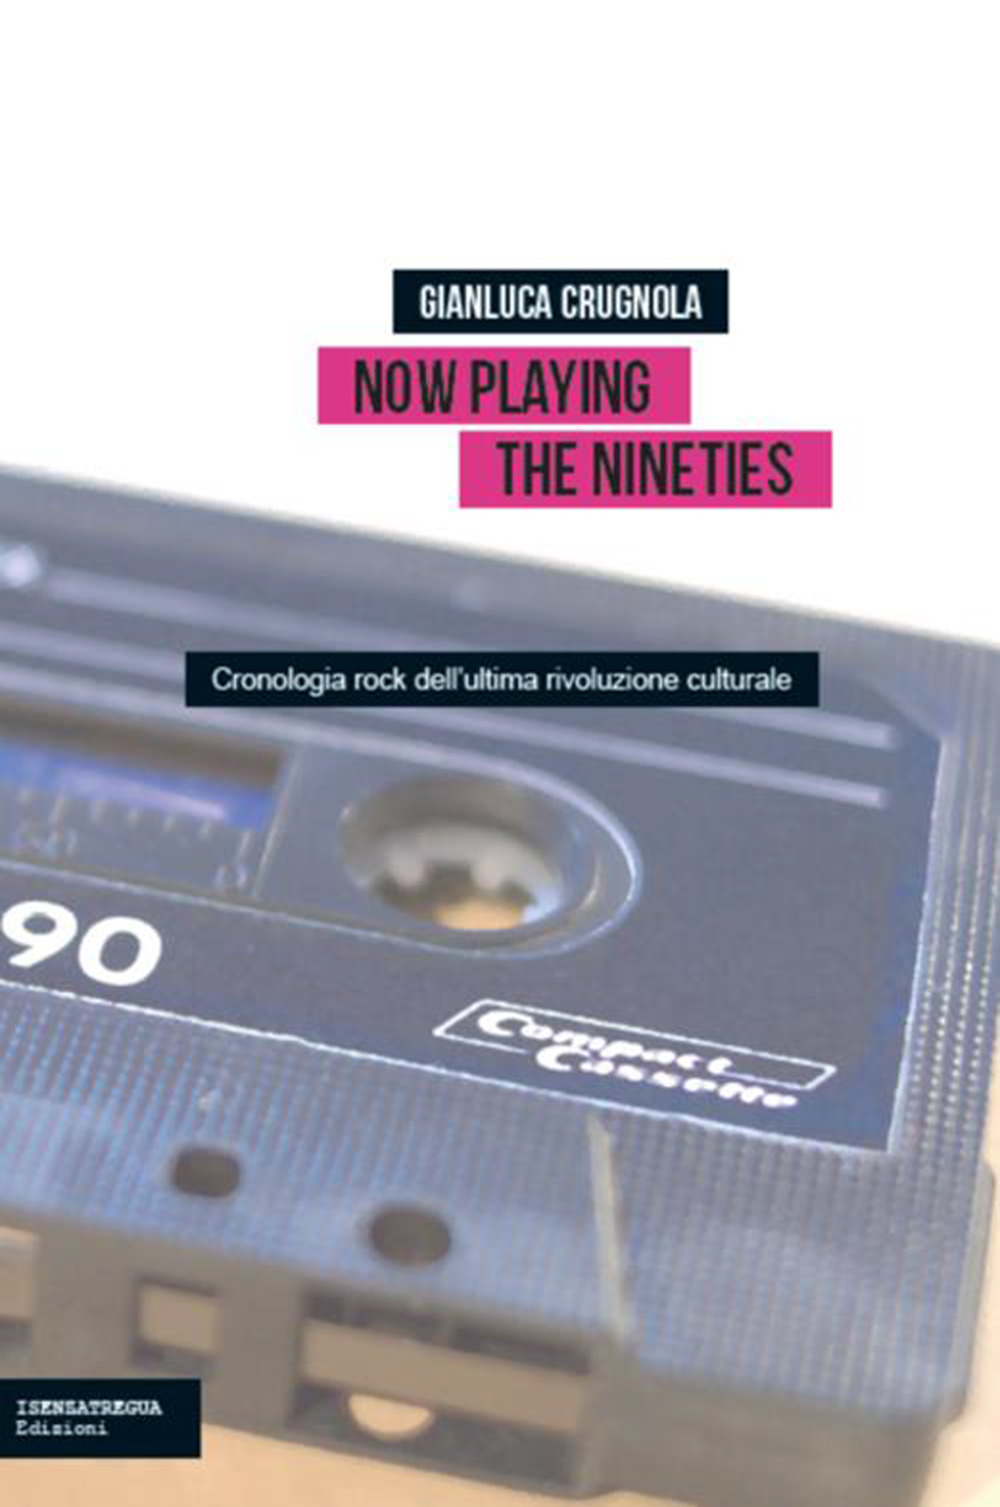 Now Playing the Nineties. Cronologia rock dell'ultima rivoluzione culturale